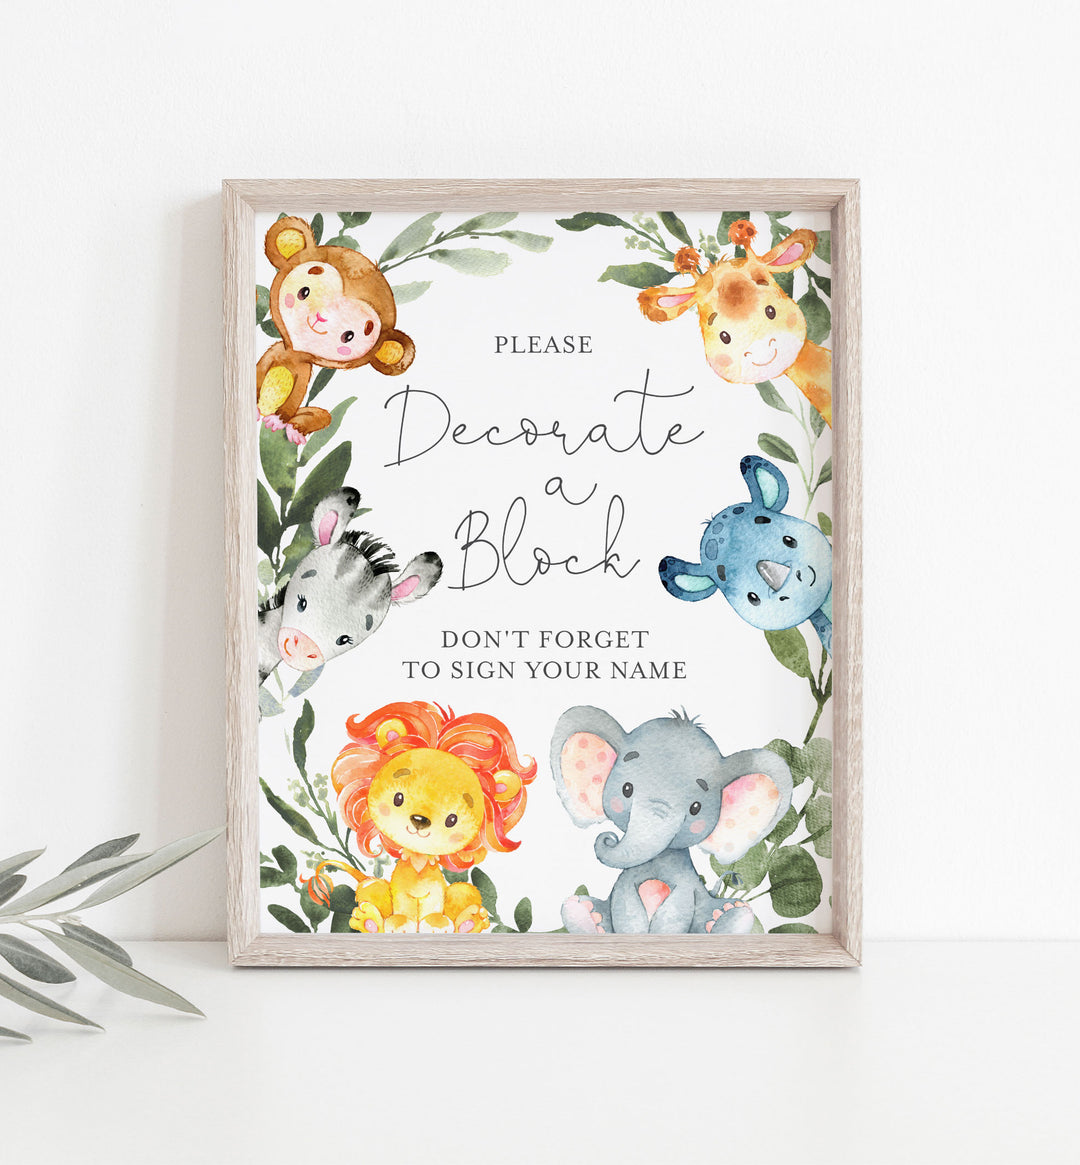 Jungle Animals Baby Shower Decorate A Block Printable